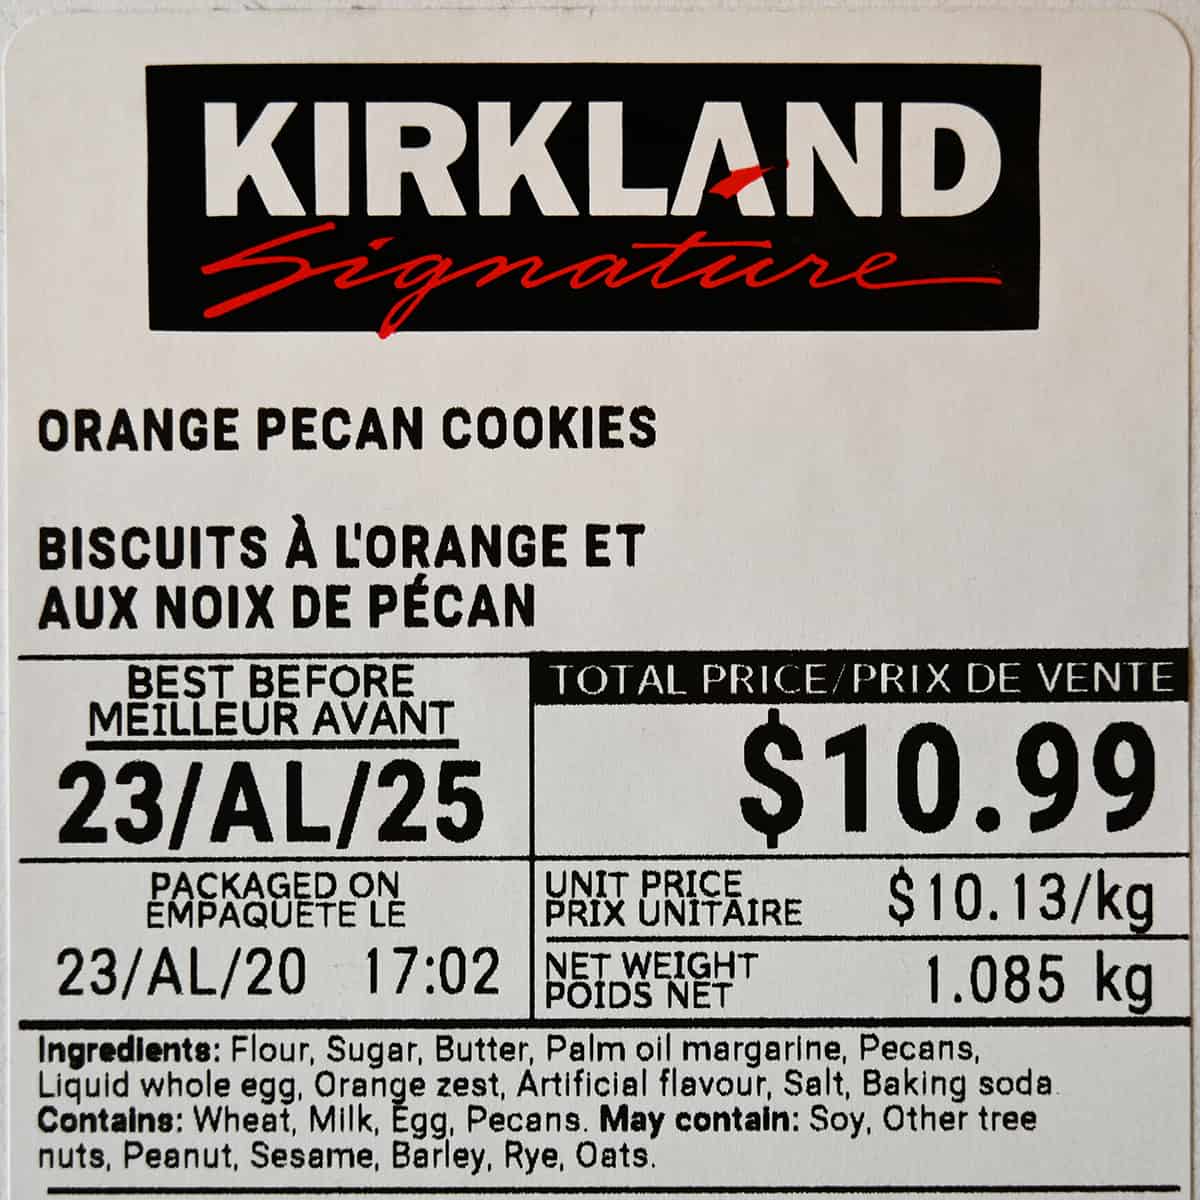 Closeup image of the front label of the cookie package showing the best before date and price.